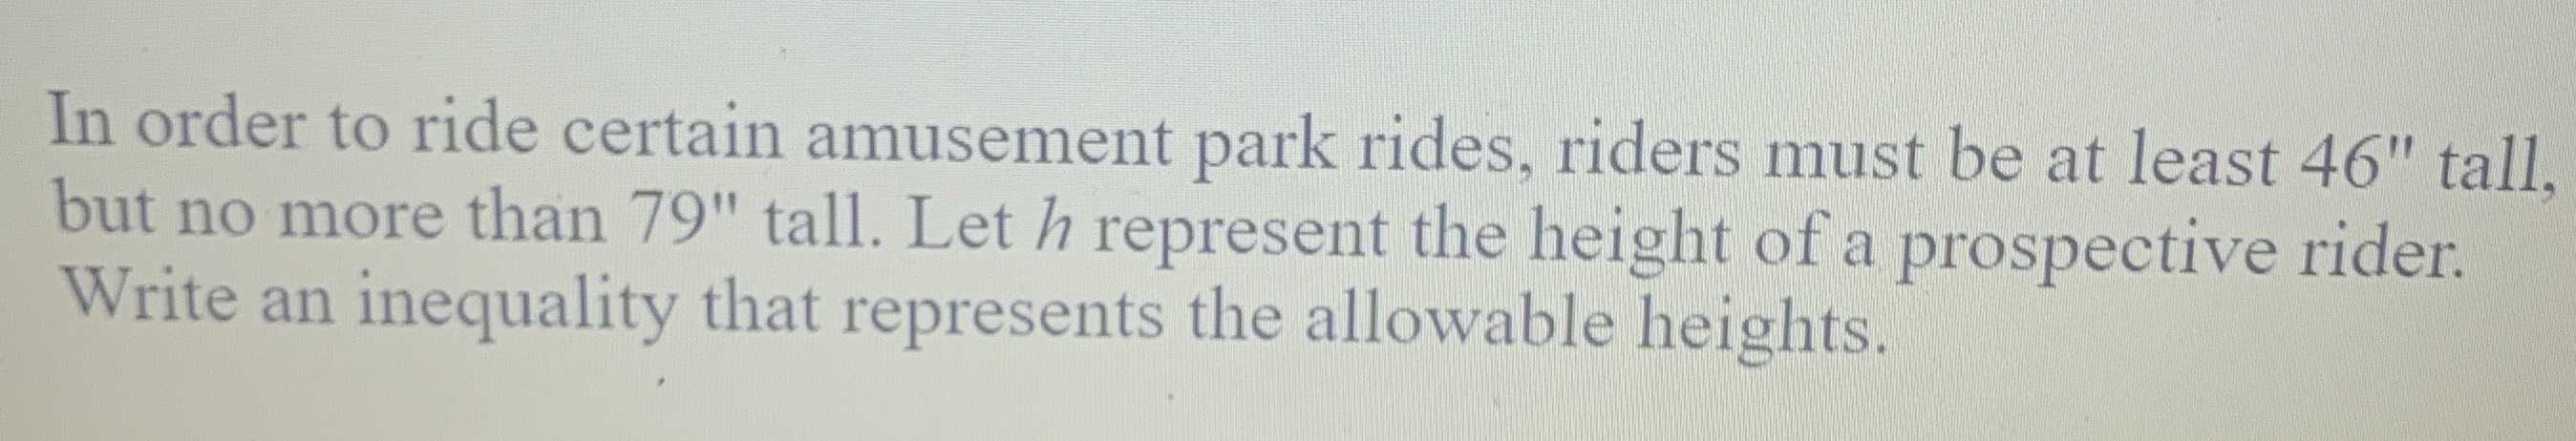 In order to ride certain amusement park rides, rid...